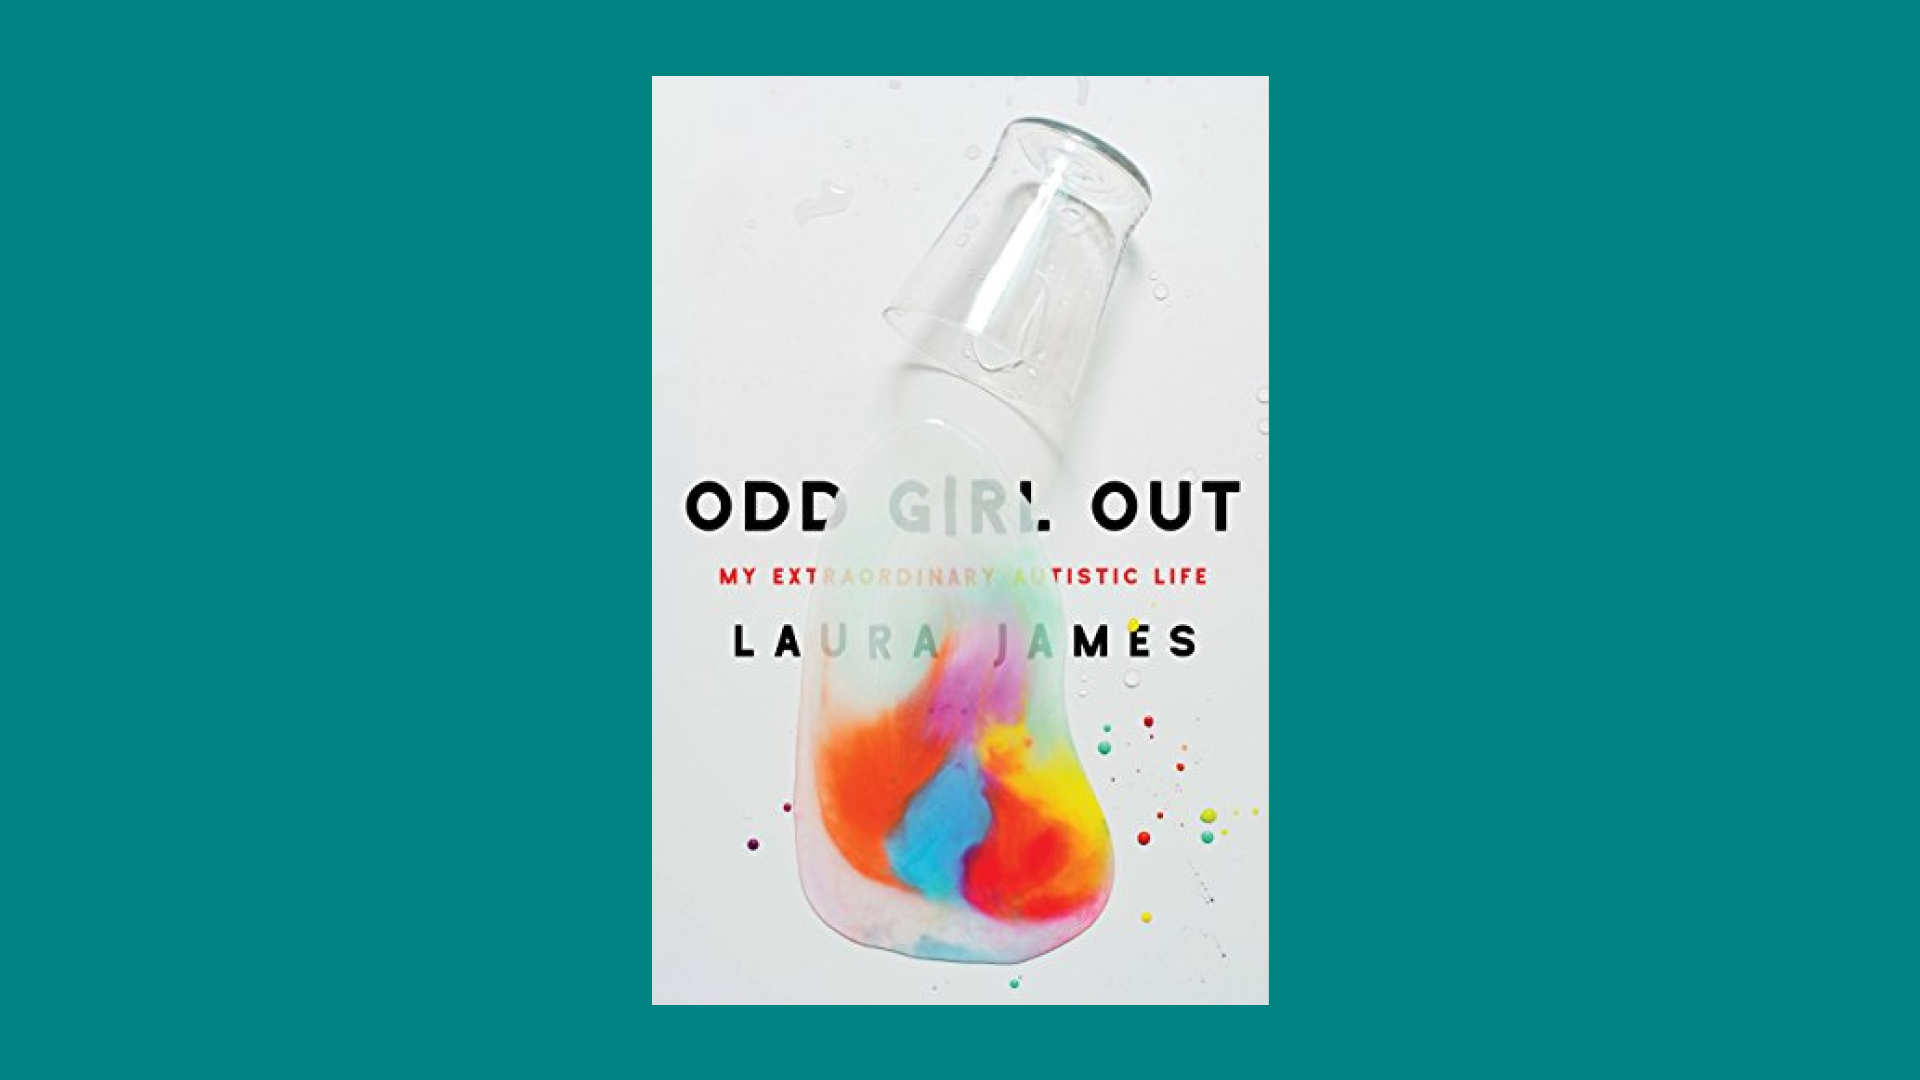 Cover of book "Odd Girl Out"